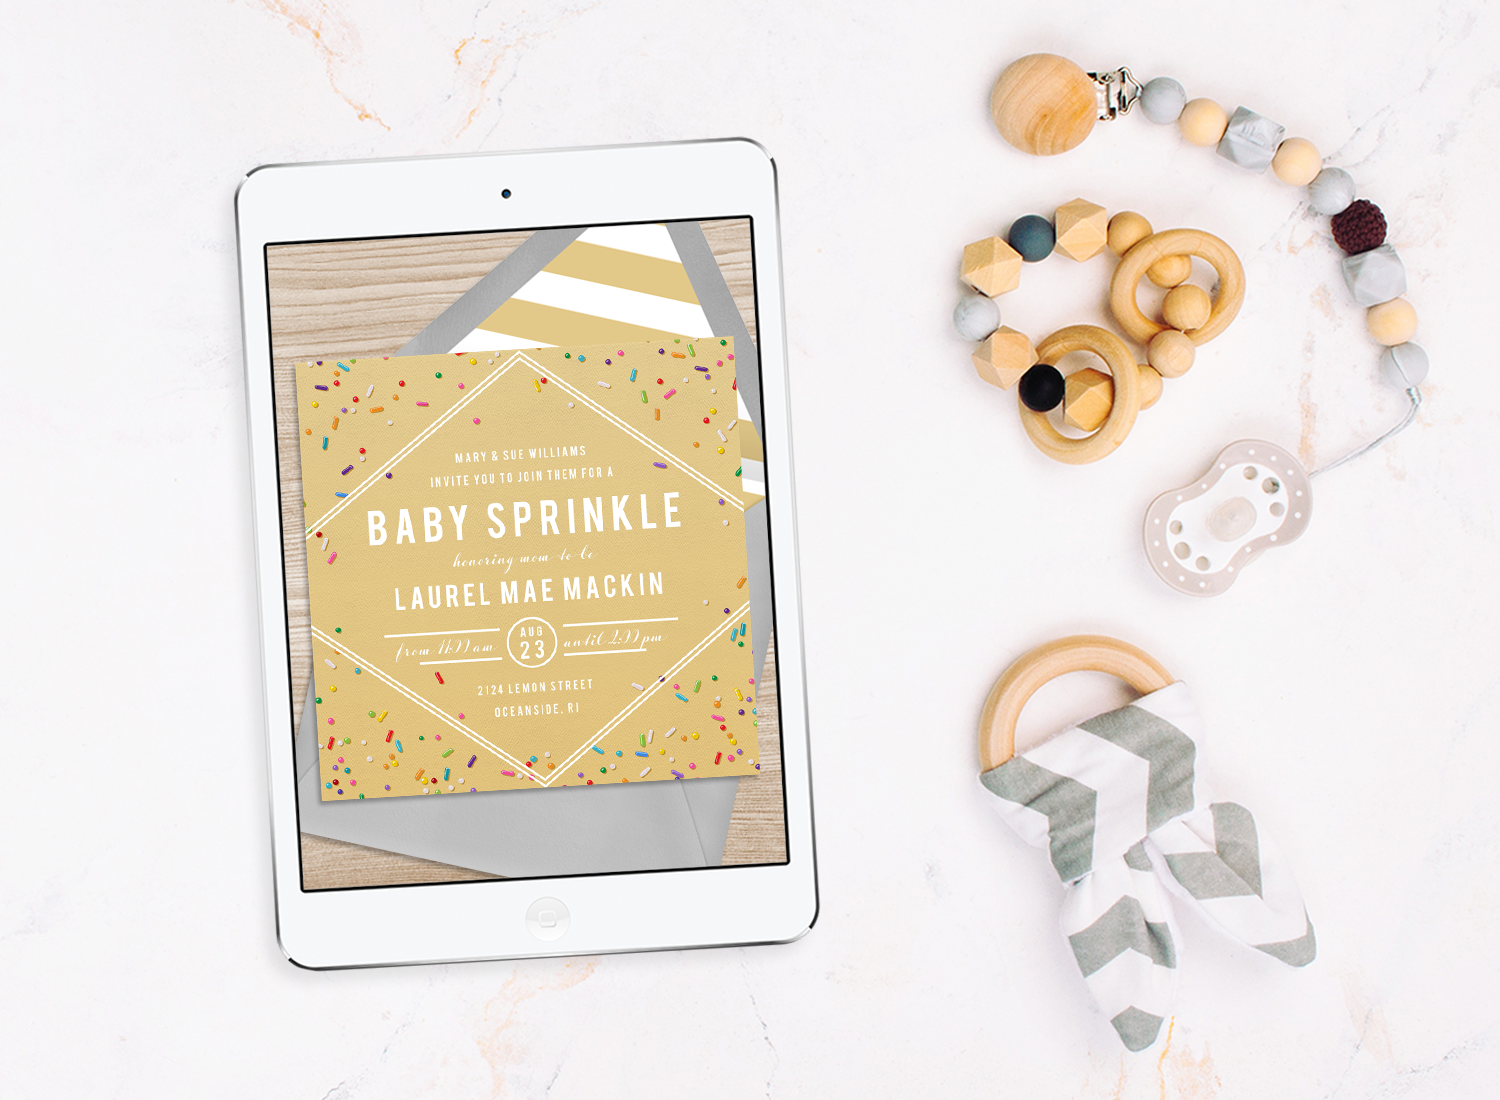 A digital baby sprinkle invitation on a tablet next to baby toys